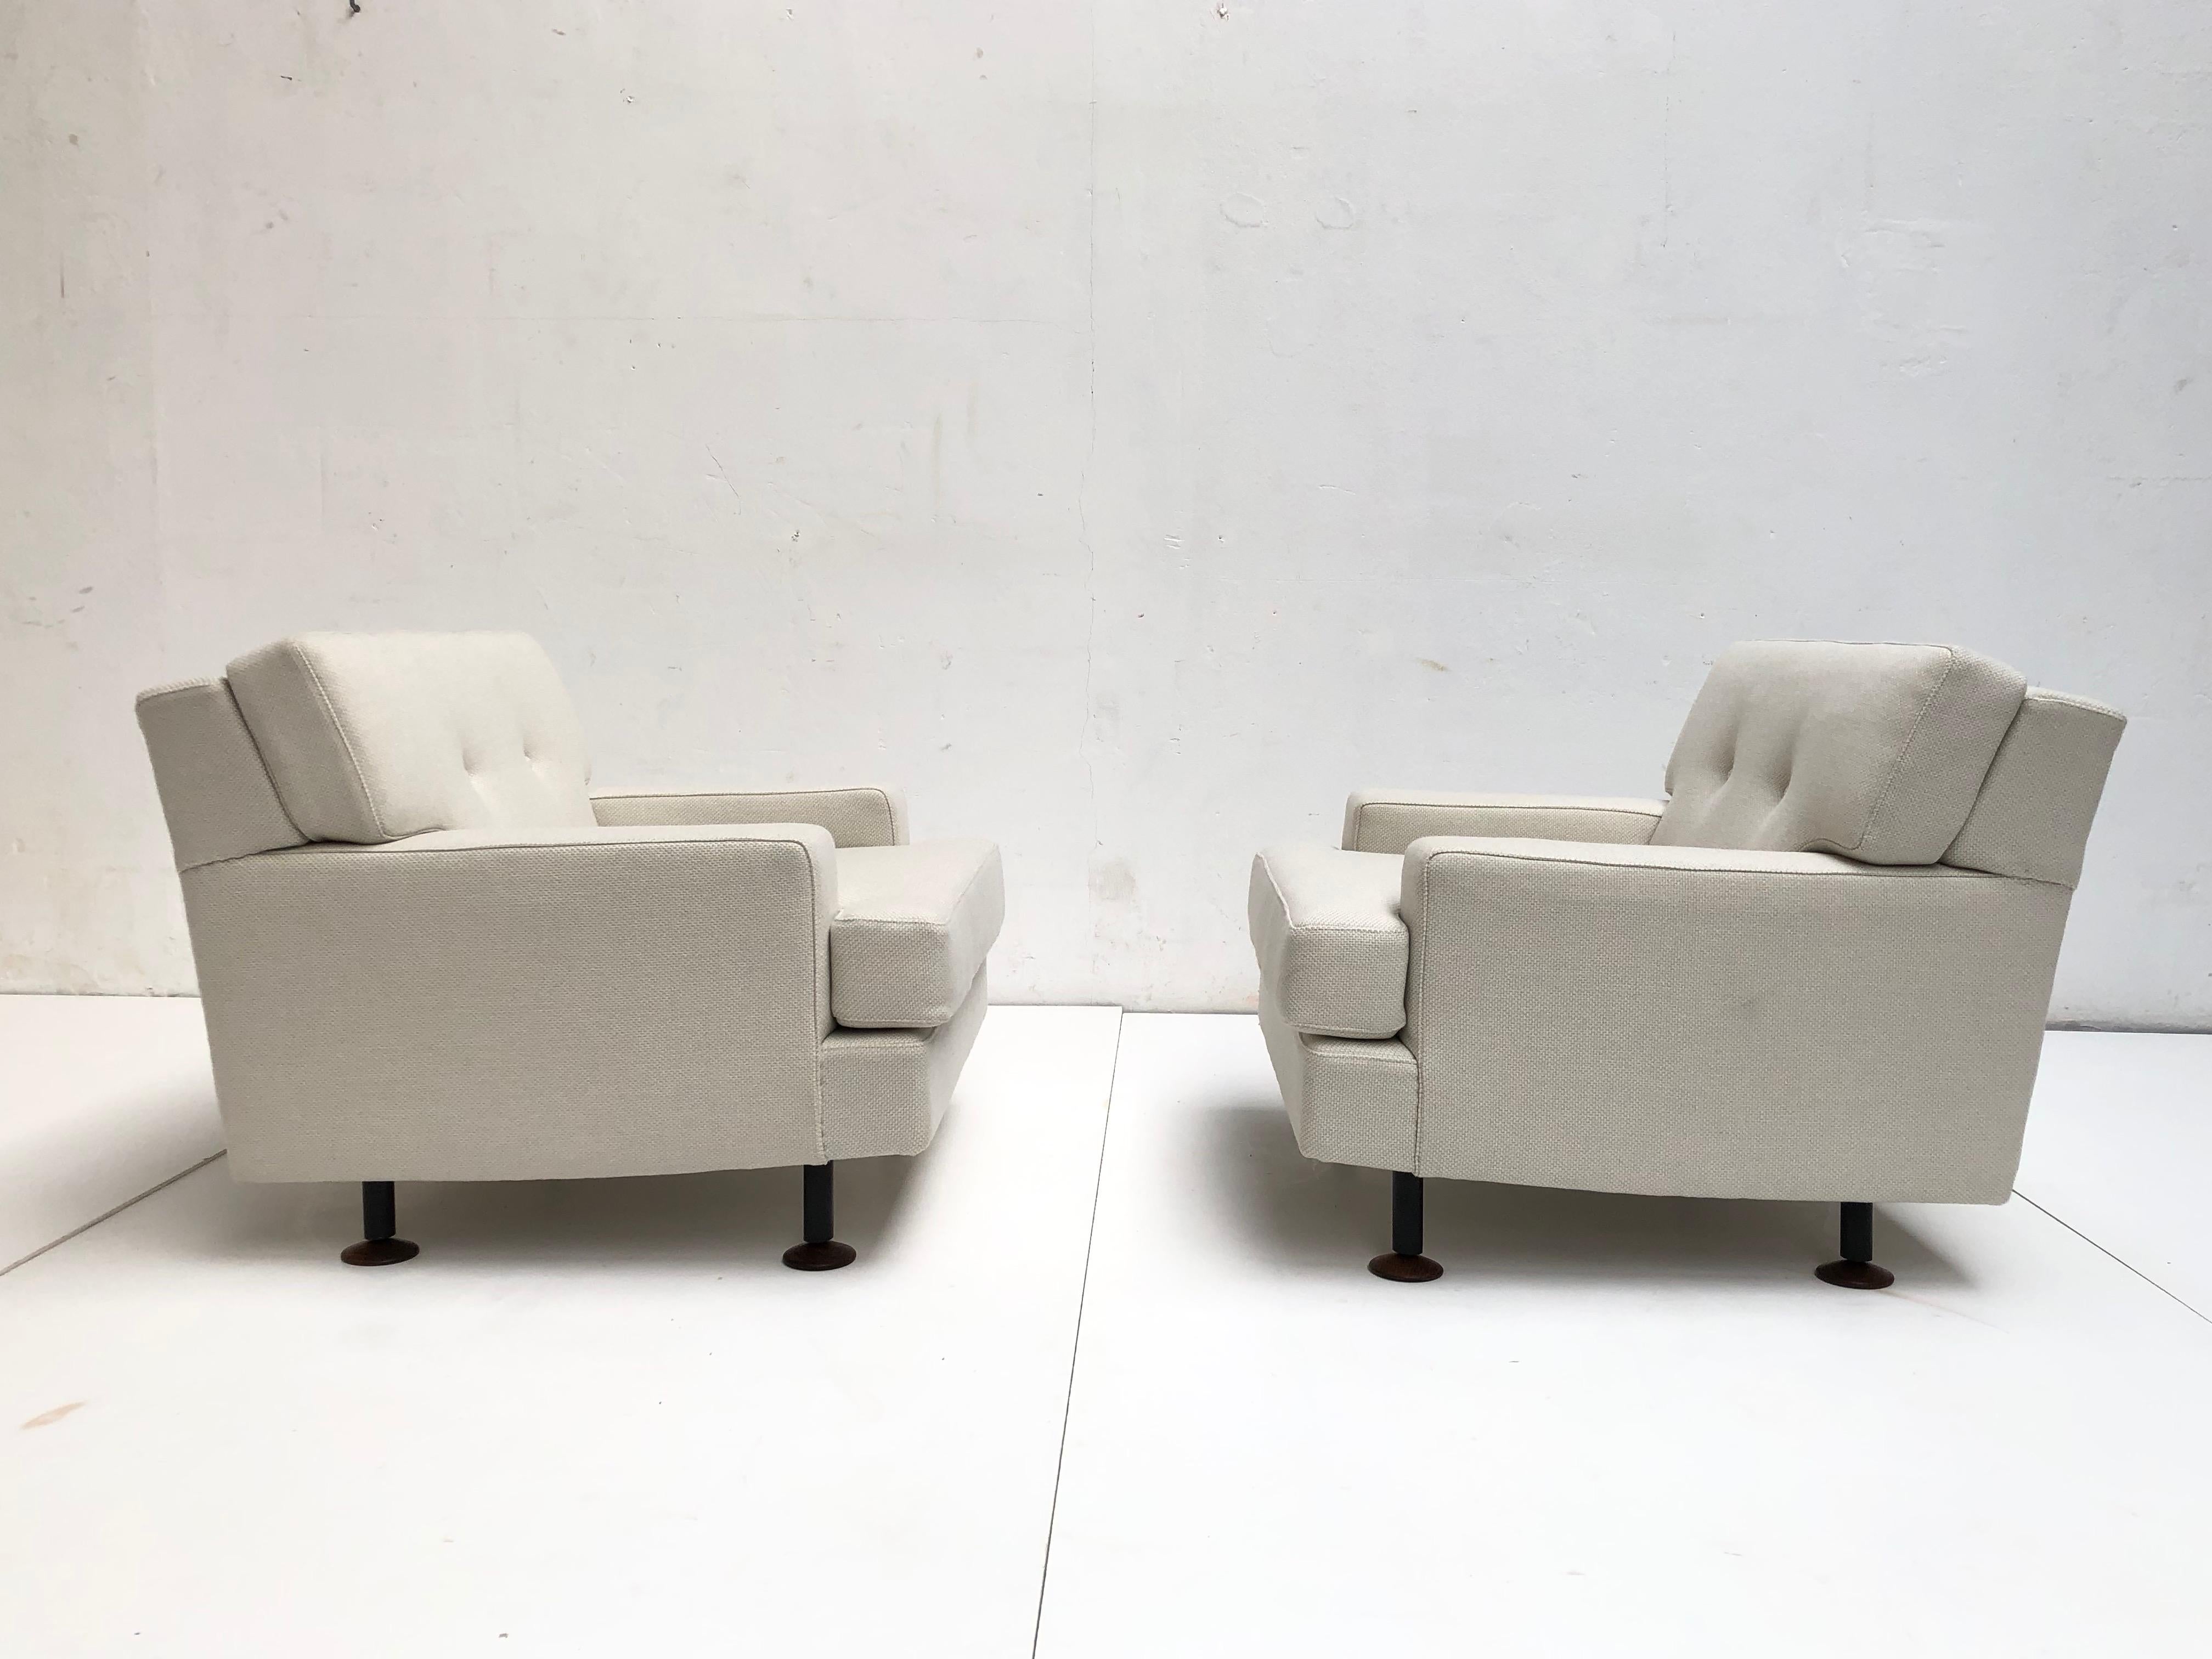 Mid-20th Century Pair of Restored 'SQUARE' Lounge Chairs by Zanuso for Arflex, Italy, 1962, Signed